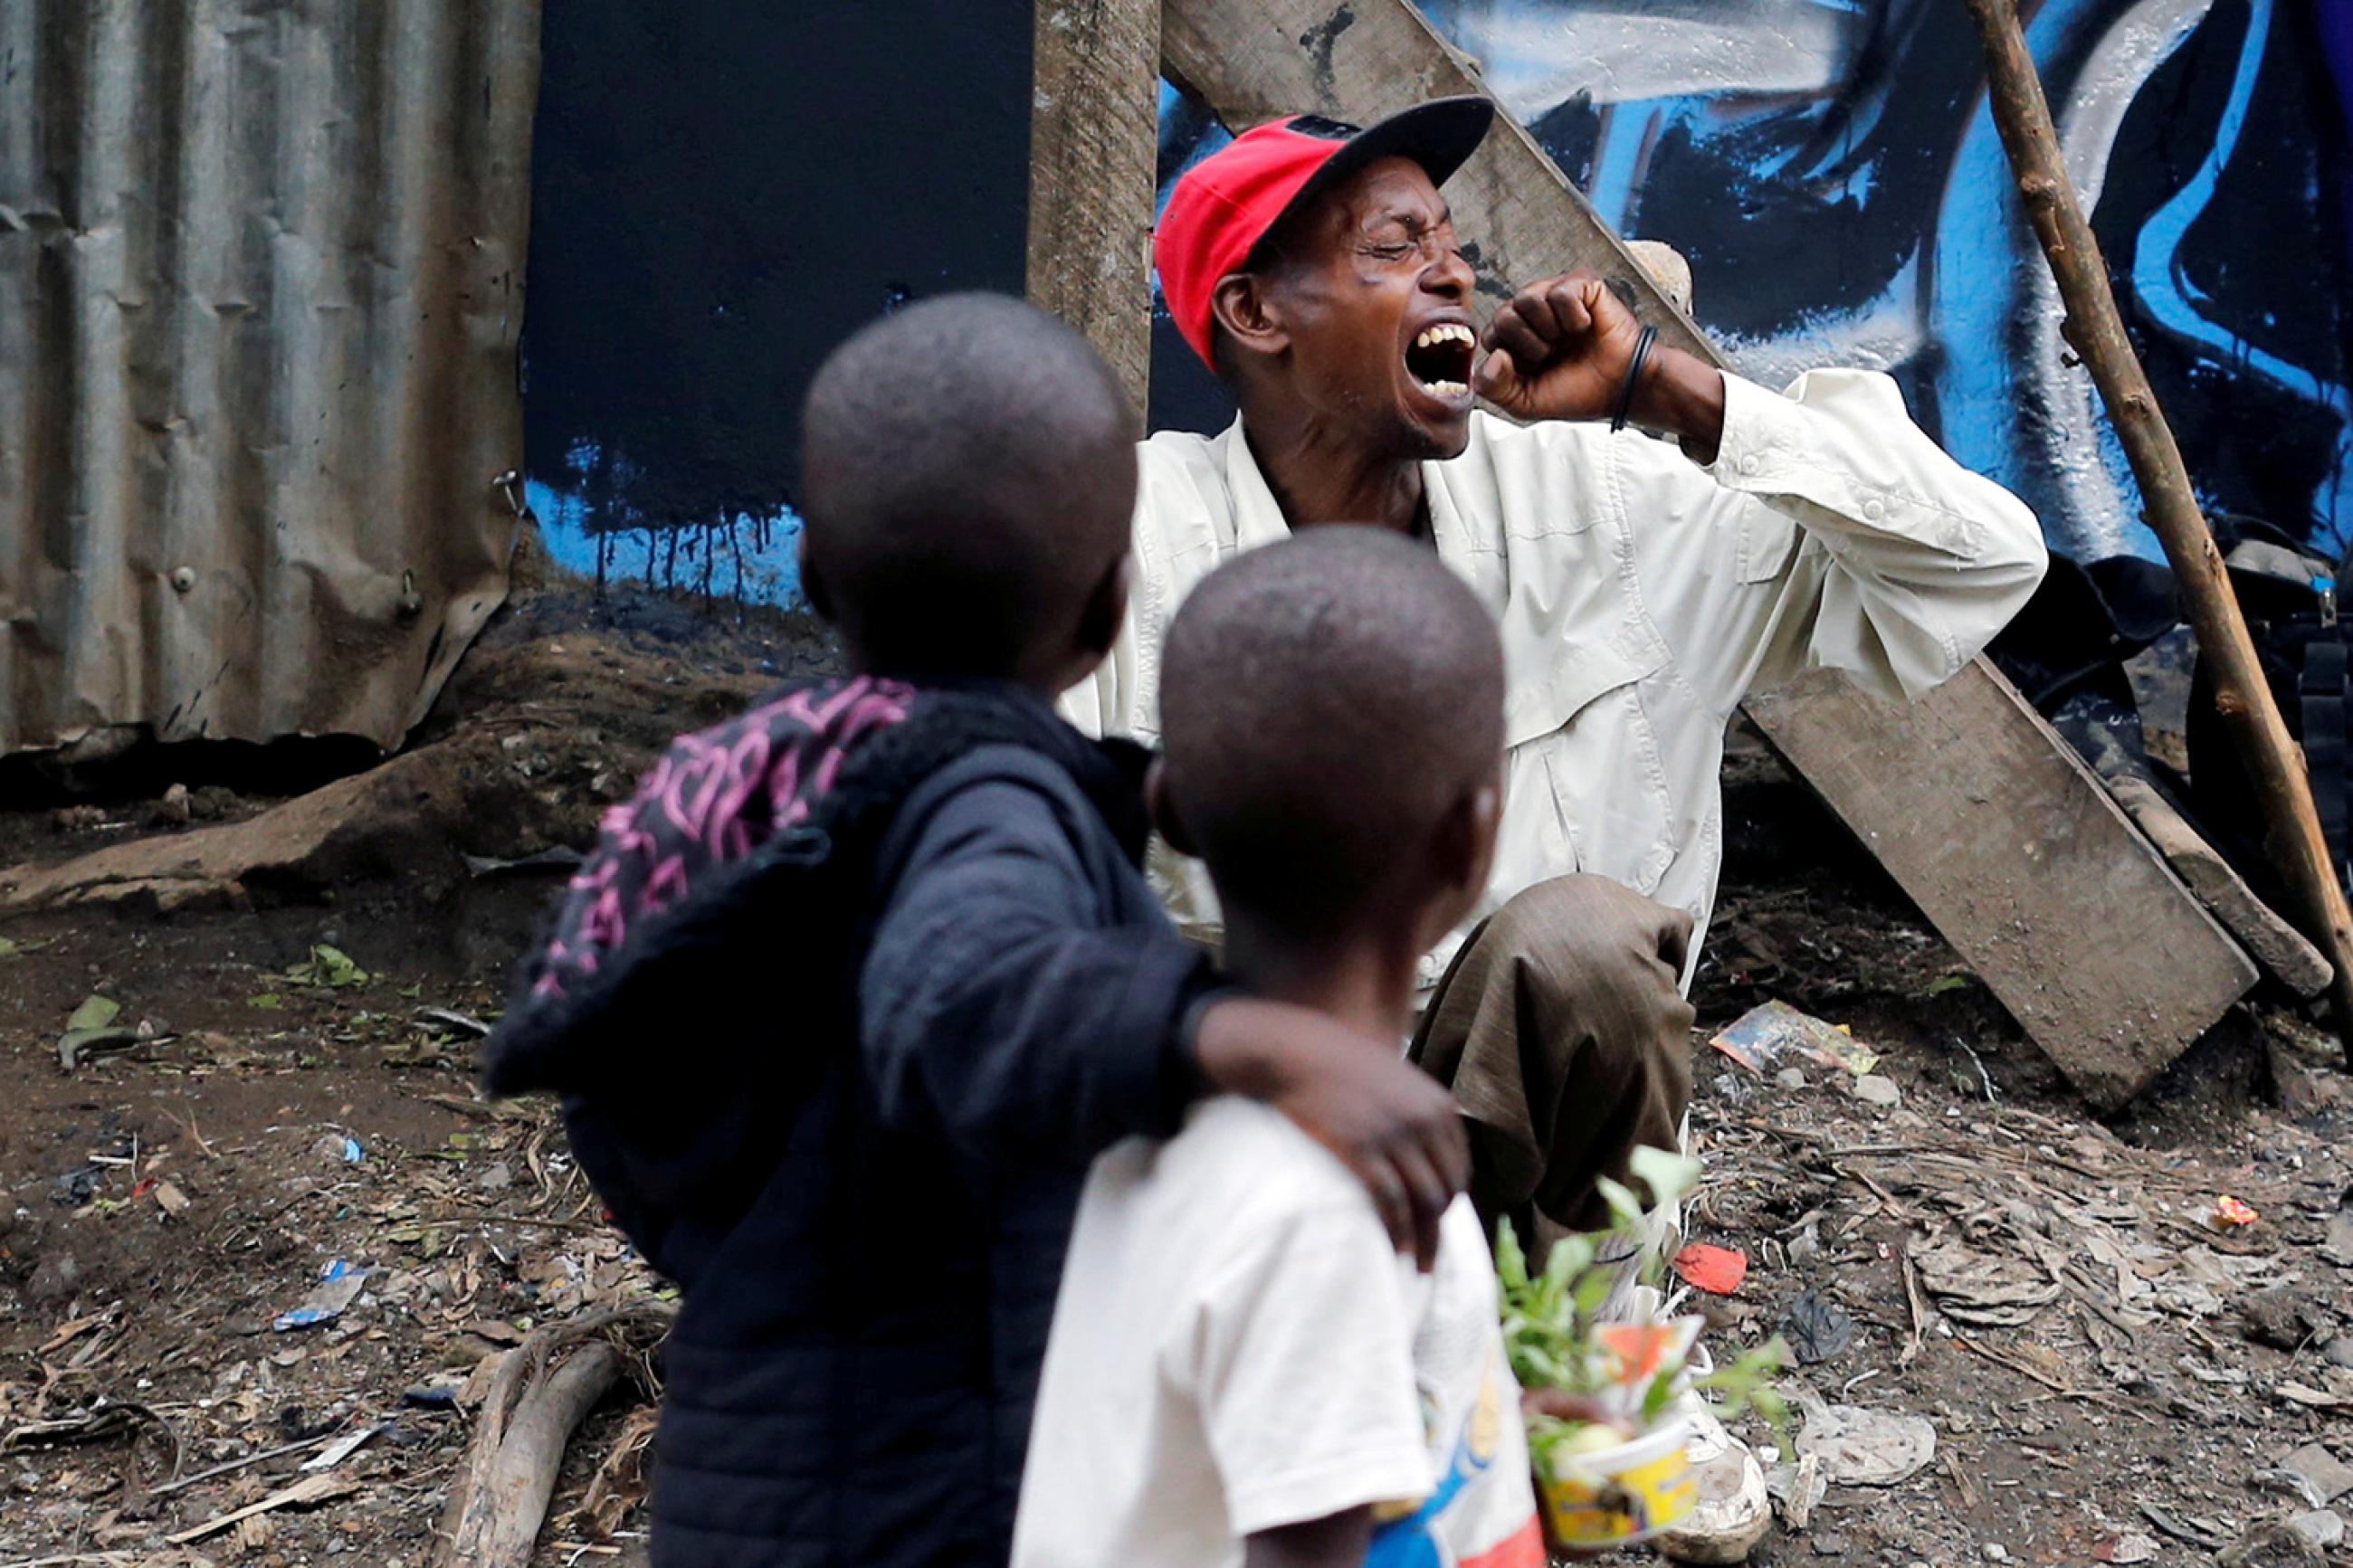 A man coughs as children walk past roadside, during the coronavirus pandemic in Nairobi, Kenya April 19, 2020. This is a powerful image of two children looking at a man who is coughing into his had with his head turned. REUTERS/Thomas Mukoya 